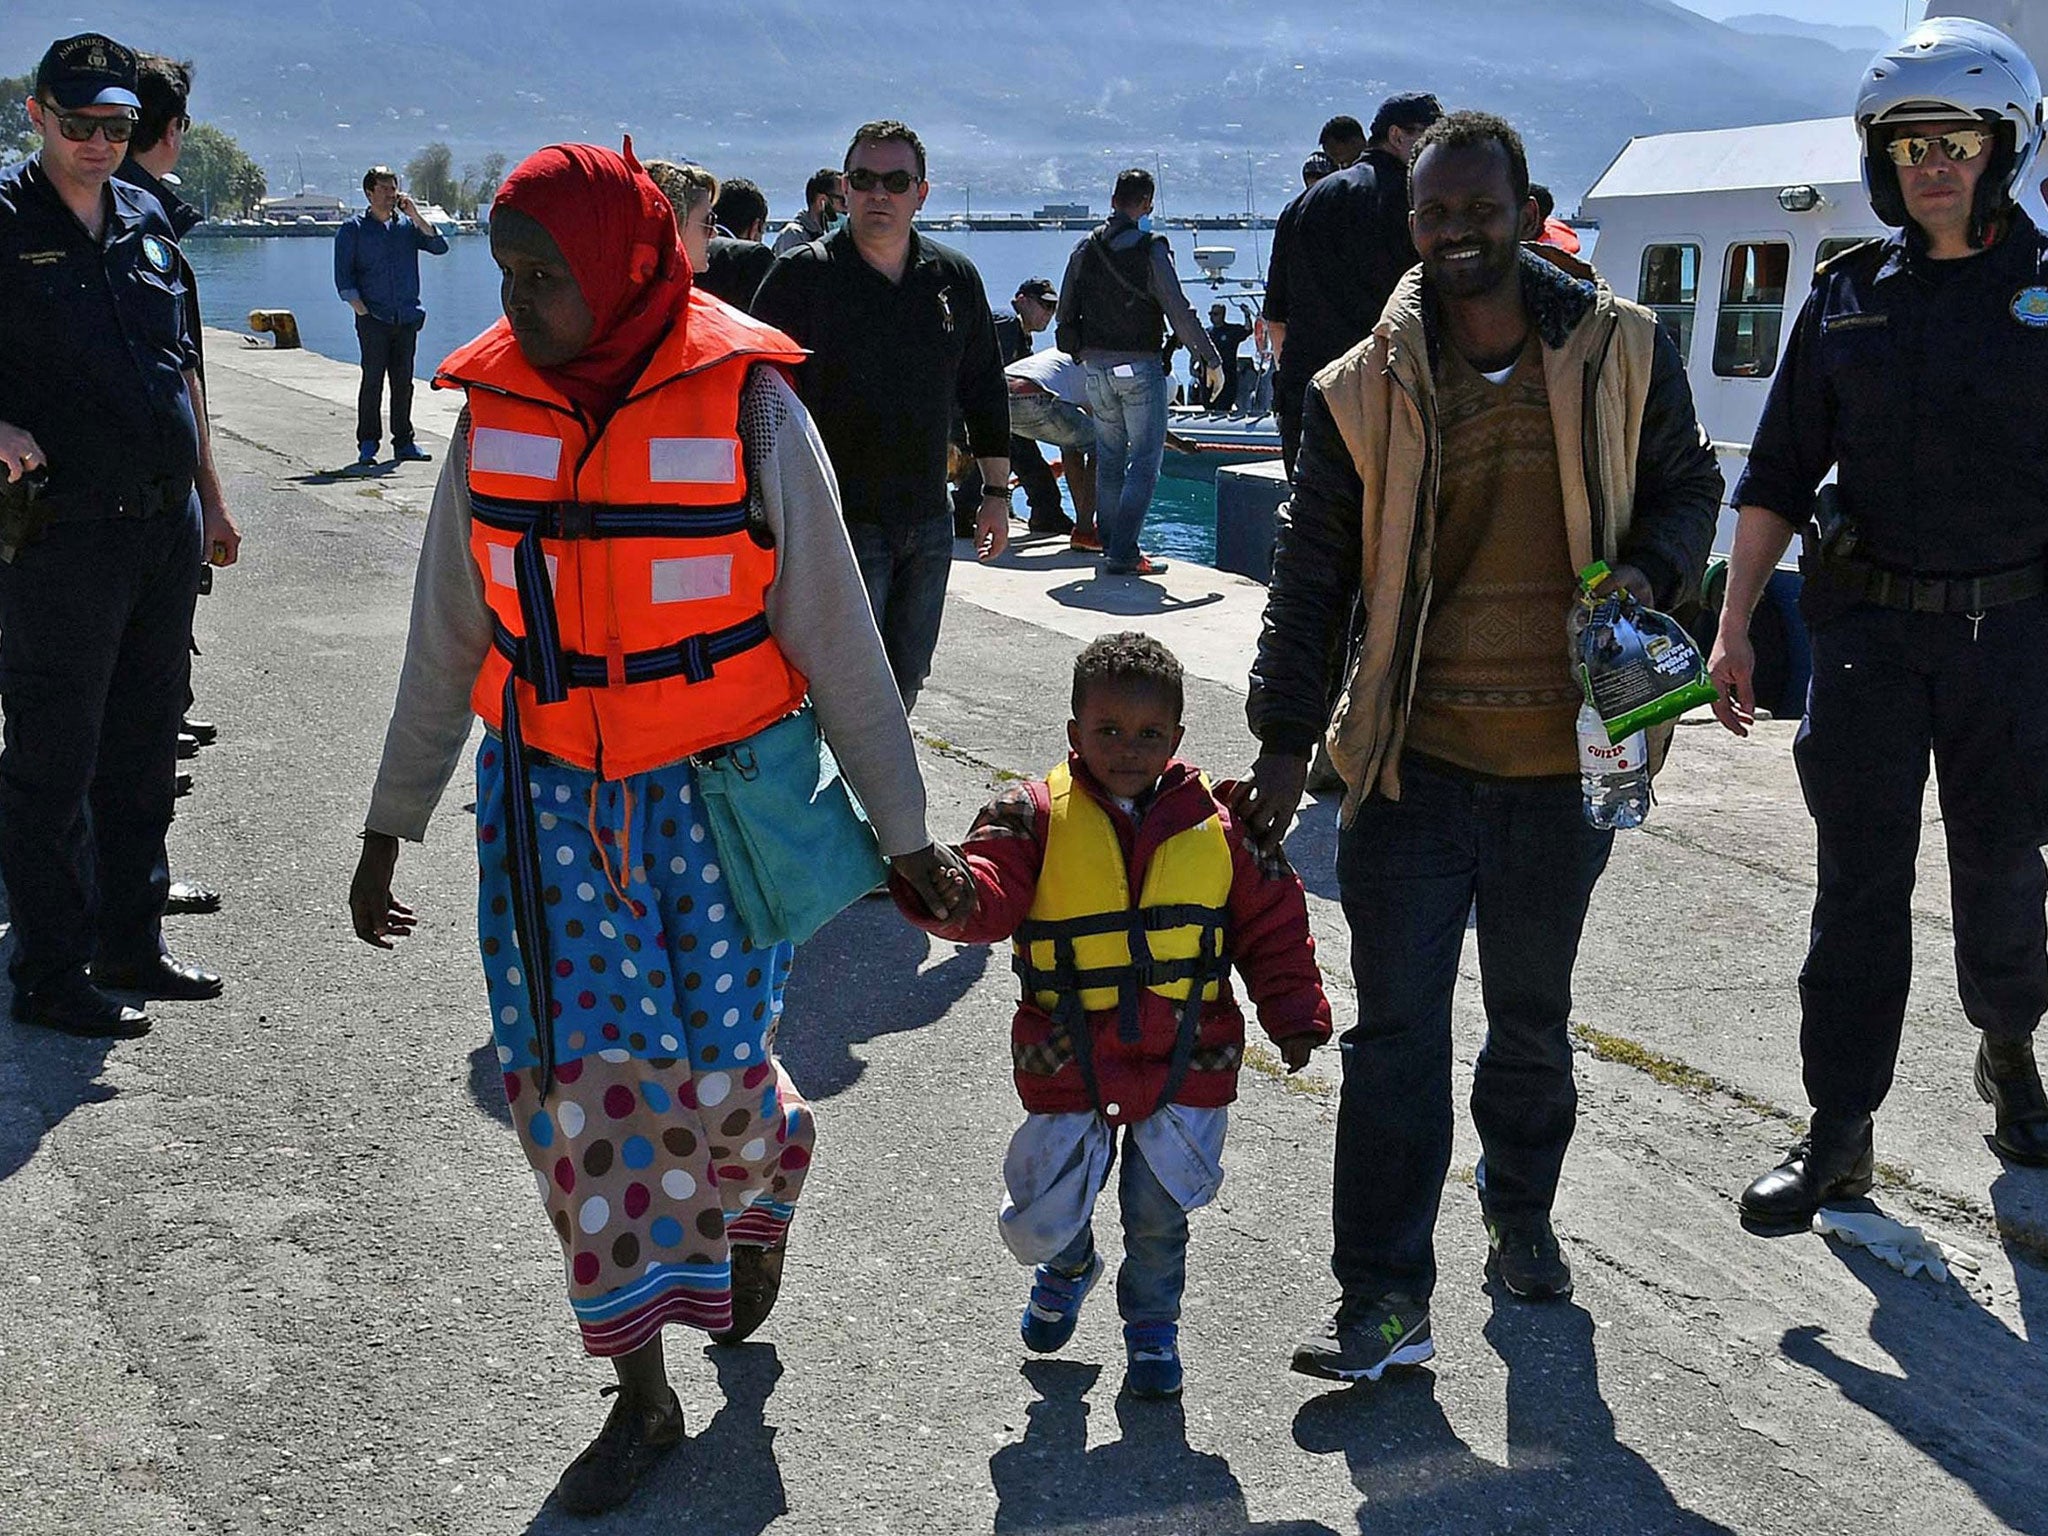 Survivors of the disaster disembark from a rescue ship in Kalmata in South Peloponnese, Greece, 17 April 2016.